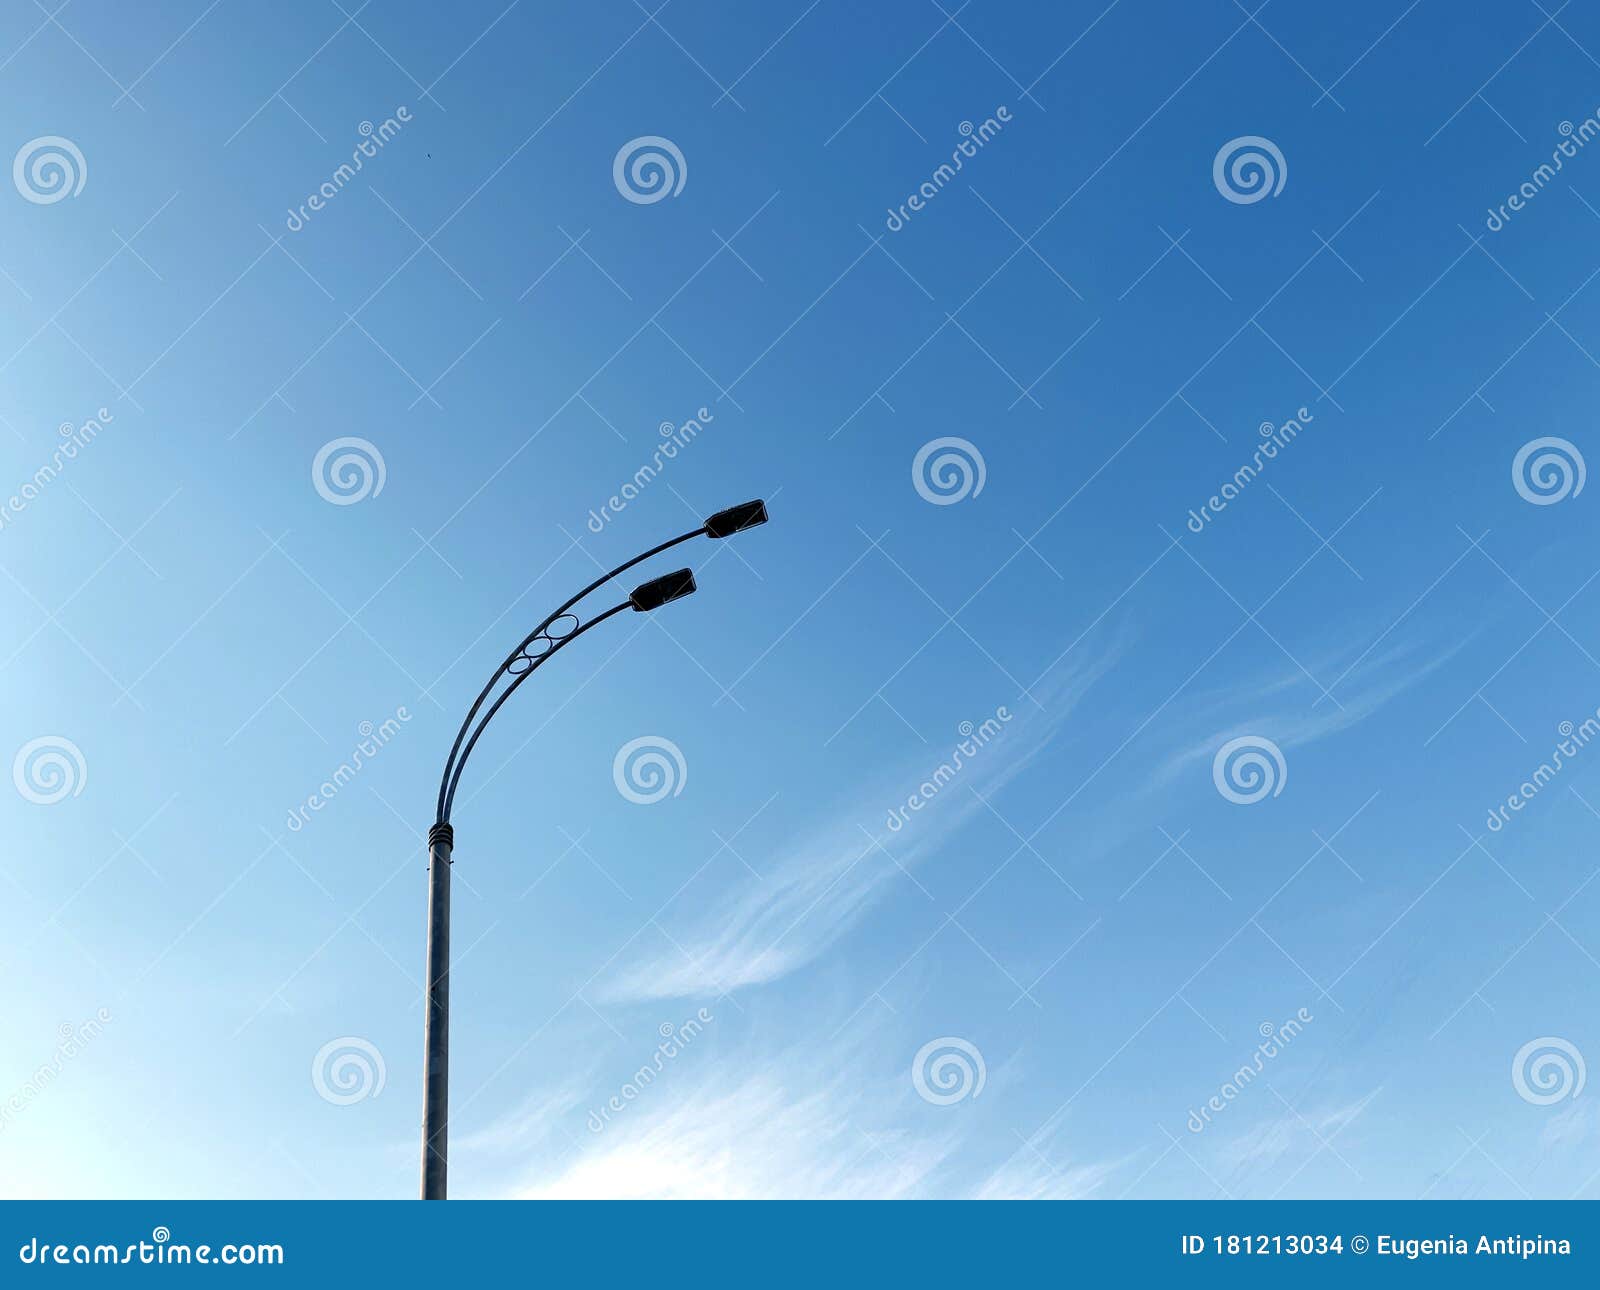 dark street lamp silhouette on blu sky background with clouds